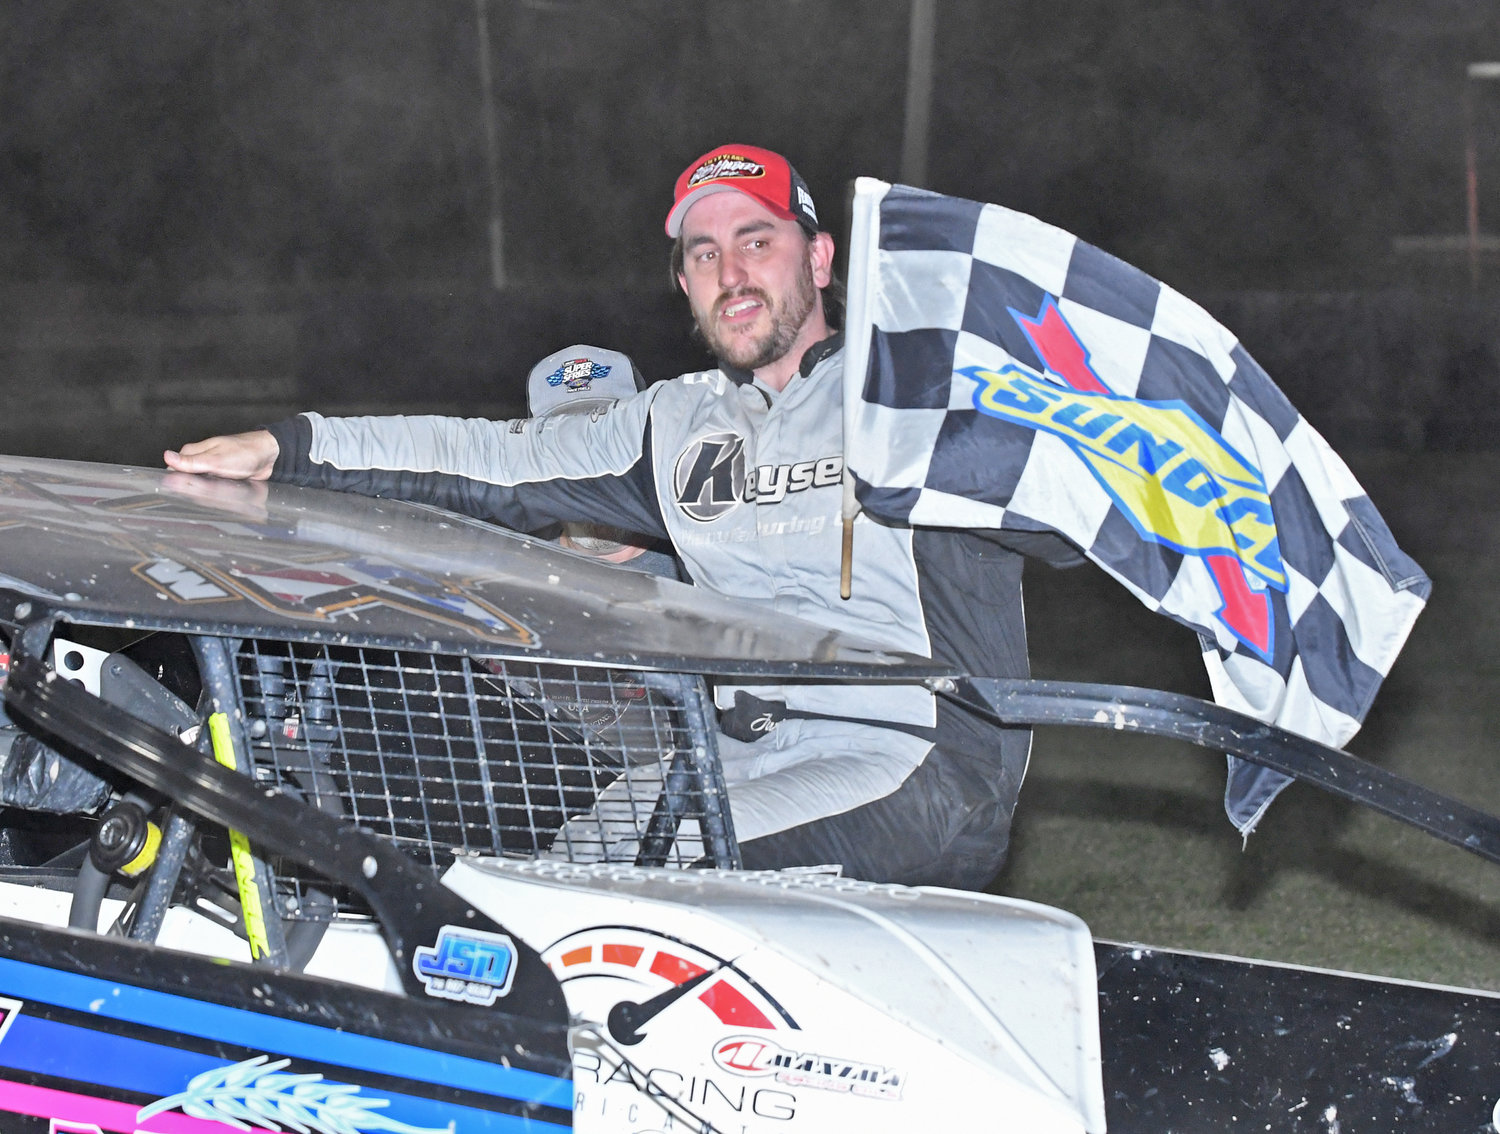 CAPTURING THE CHECKERED FLAG — Justin Wright, of York, NY, won his first modified feature race of the season at Utica-Rome Speedway last Friday night. He won the first of the two 20-lap twin modified features.